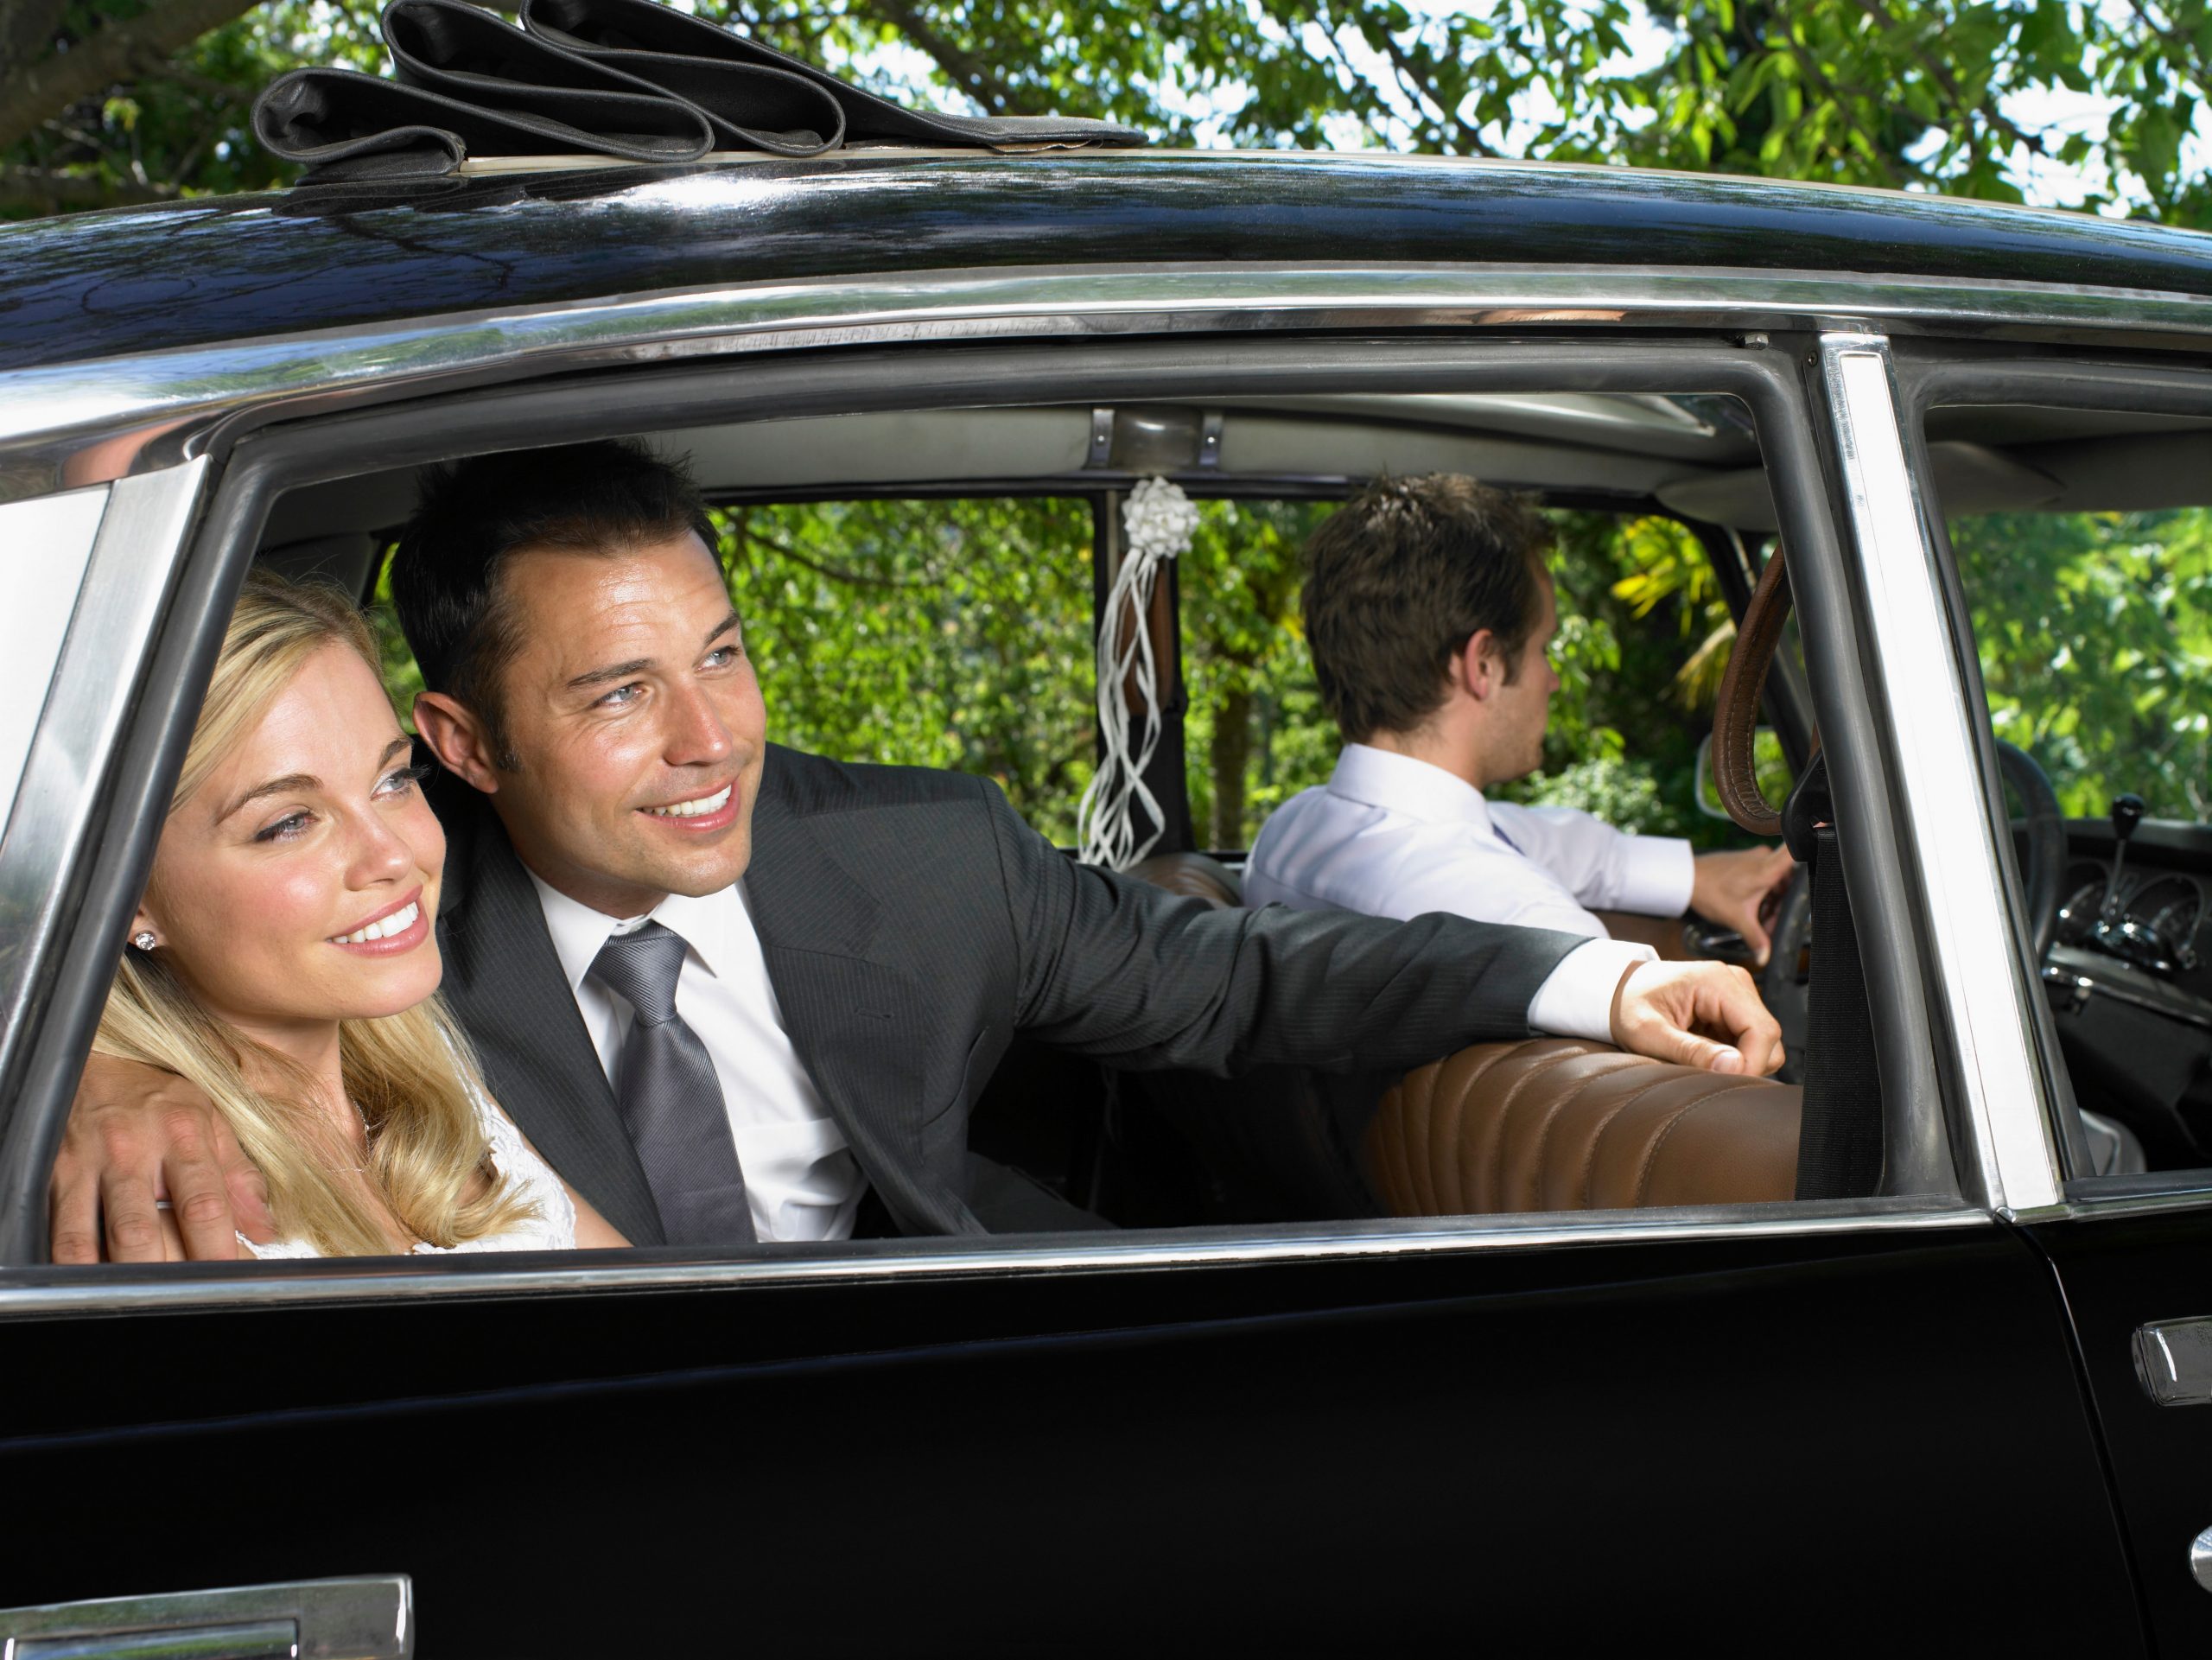 5 Reasons To Hire Chauffeur-Driven Wedding Cars